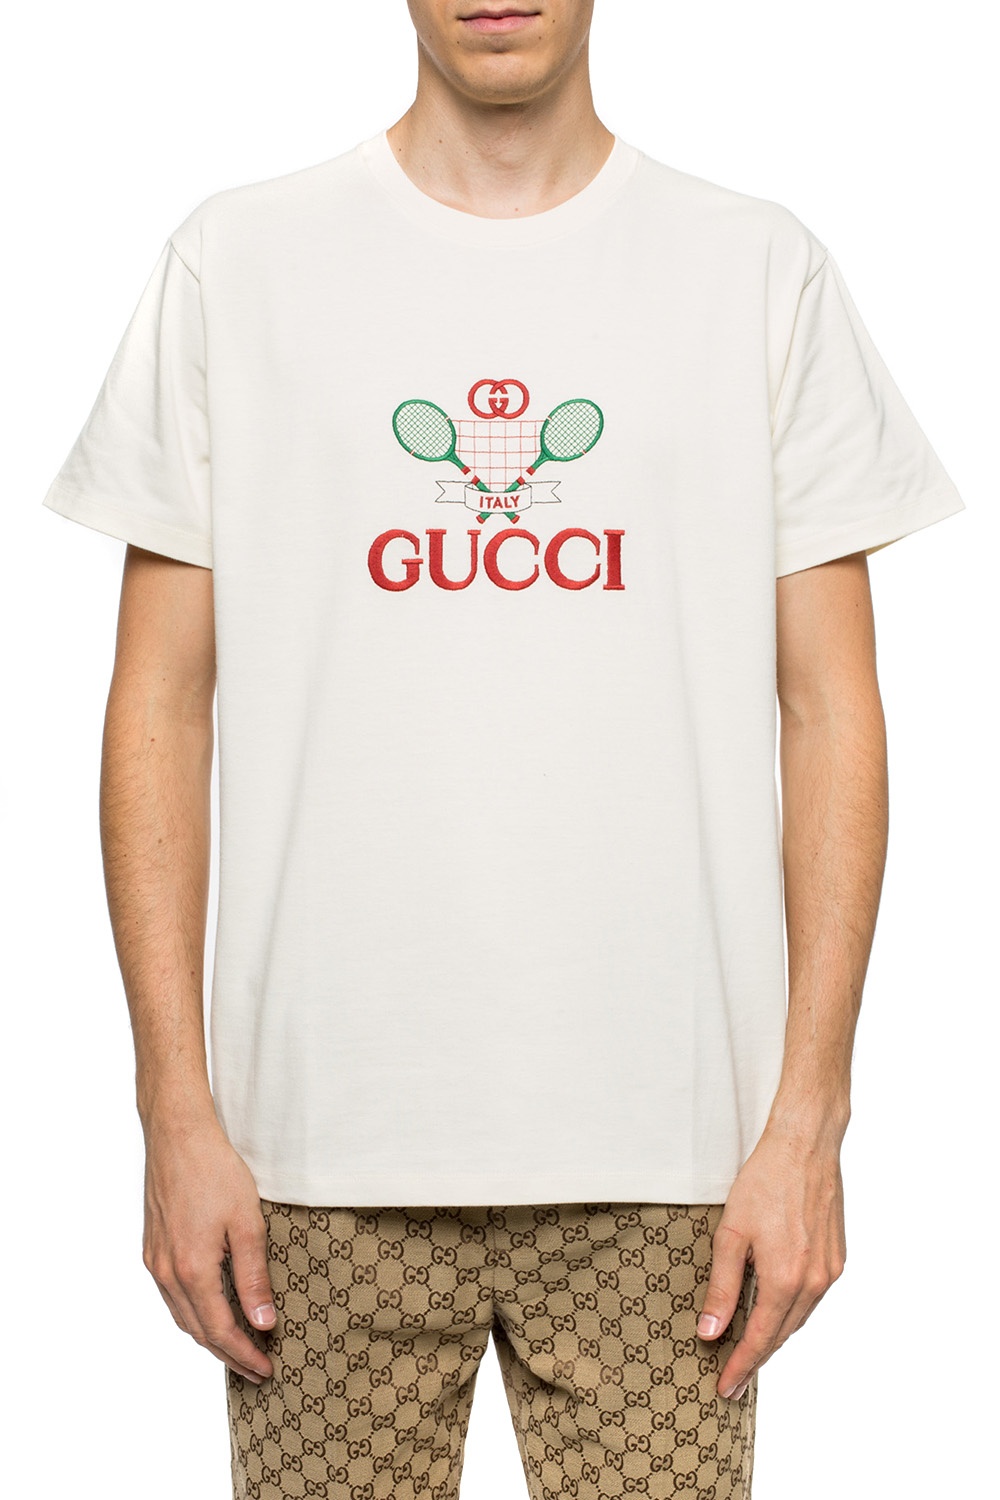 gucci embroidered t shirt